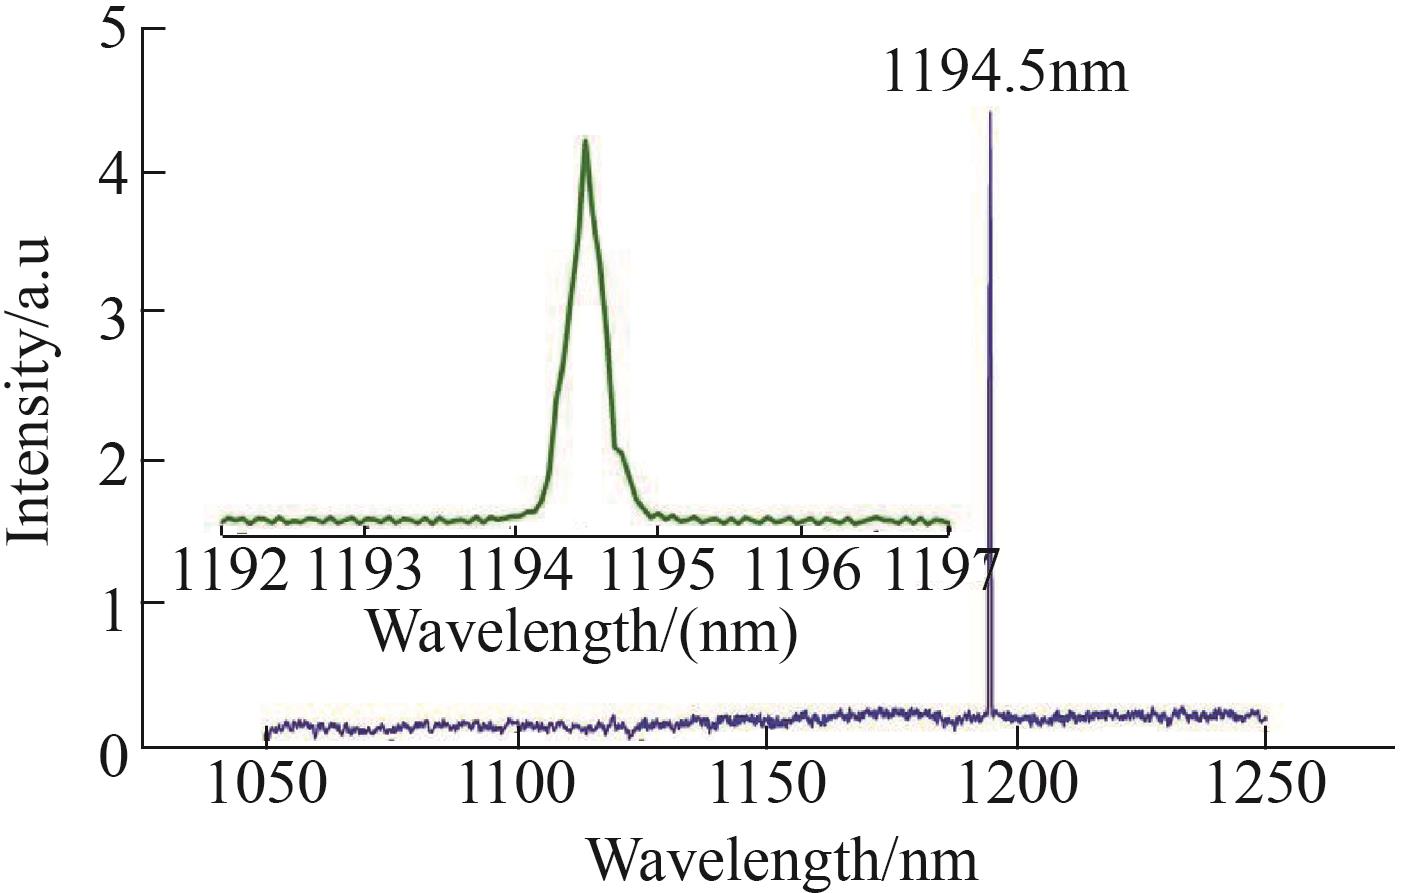 The measured laser output spectra